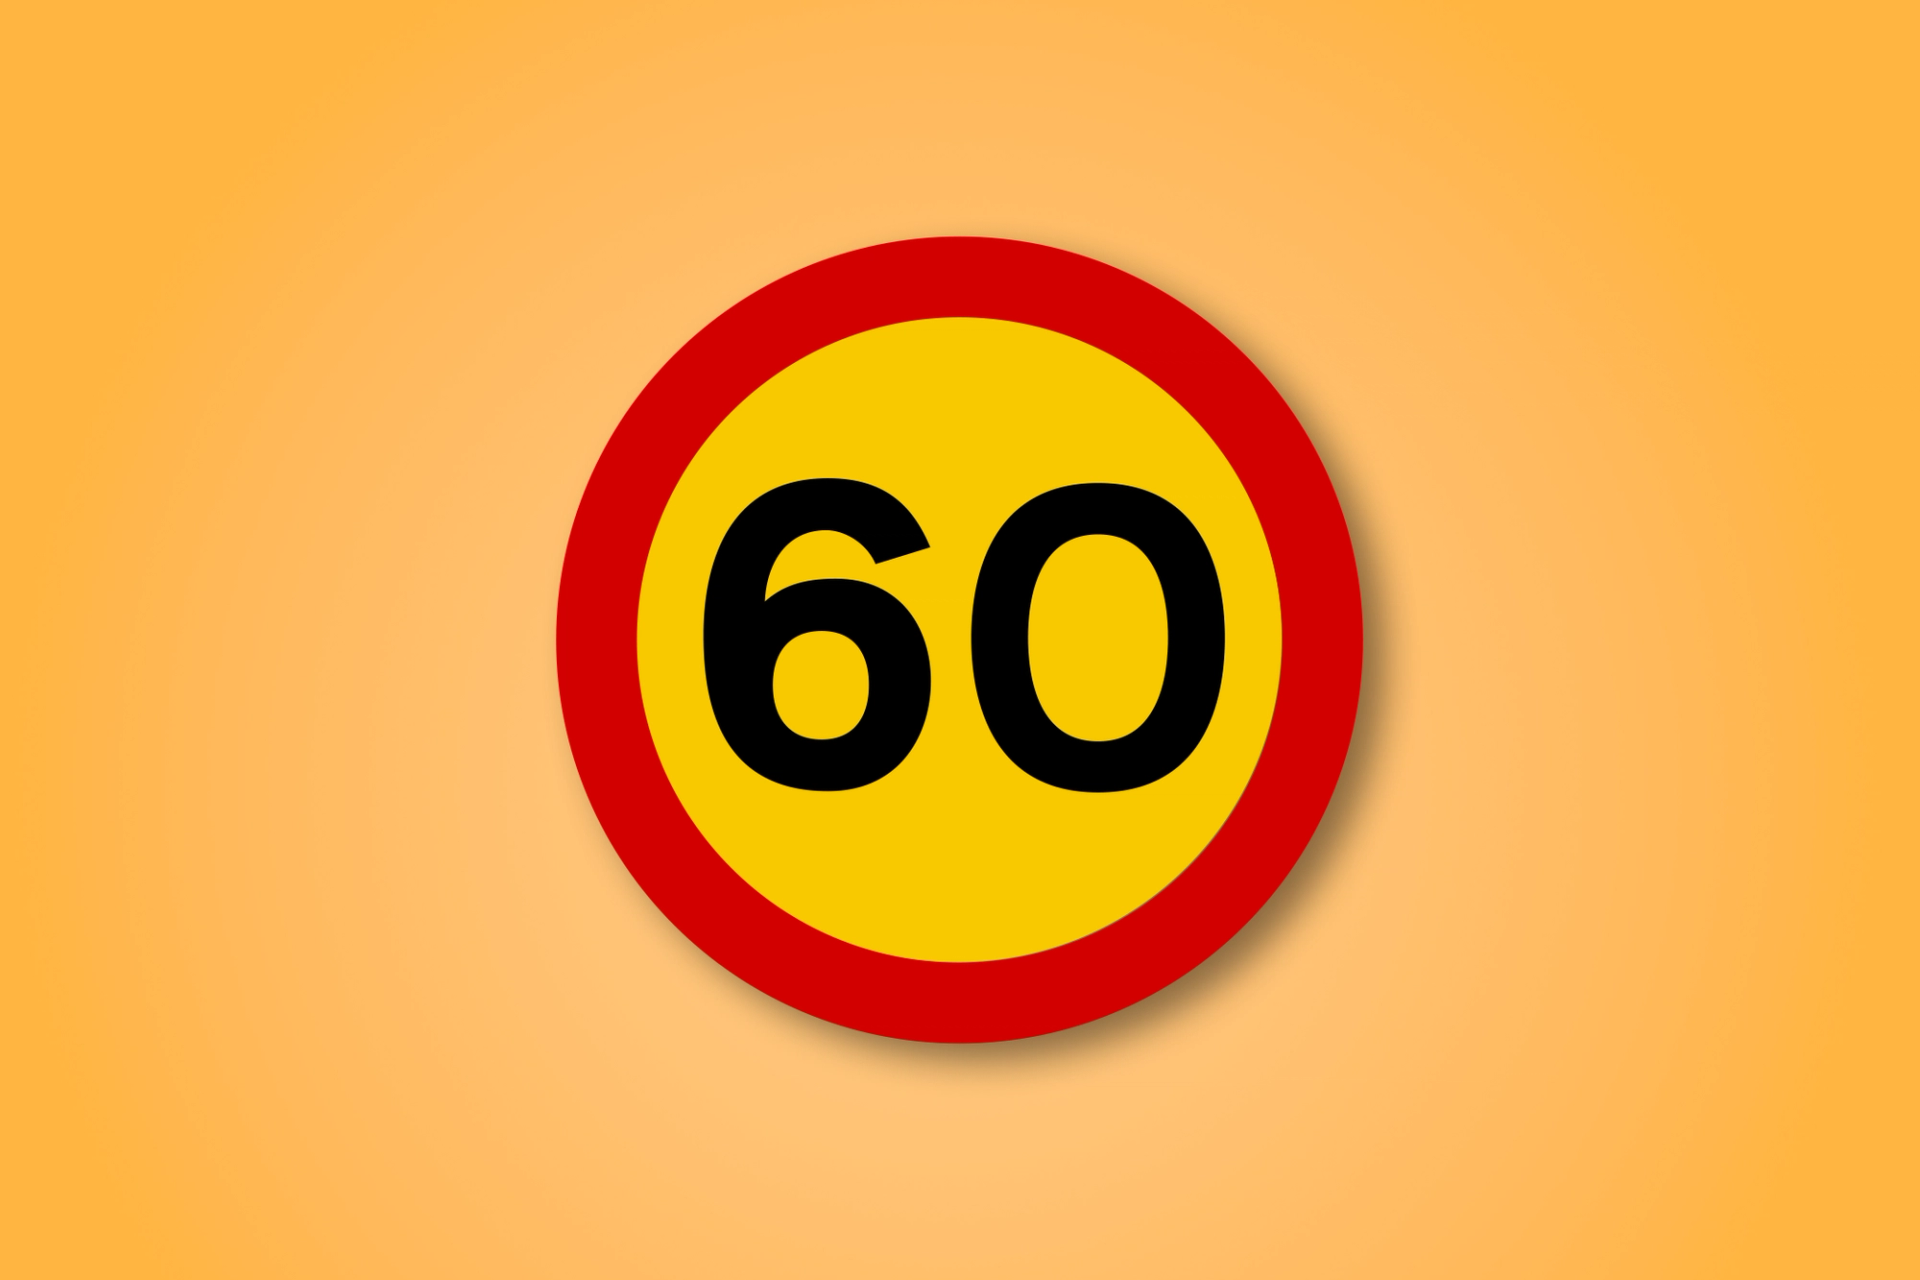 Red and yellow circle road sign with the number 60 in the middle. This road sign means the Speed limit is 60.